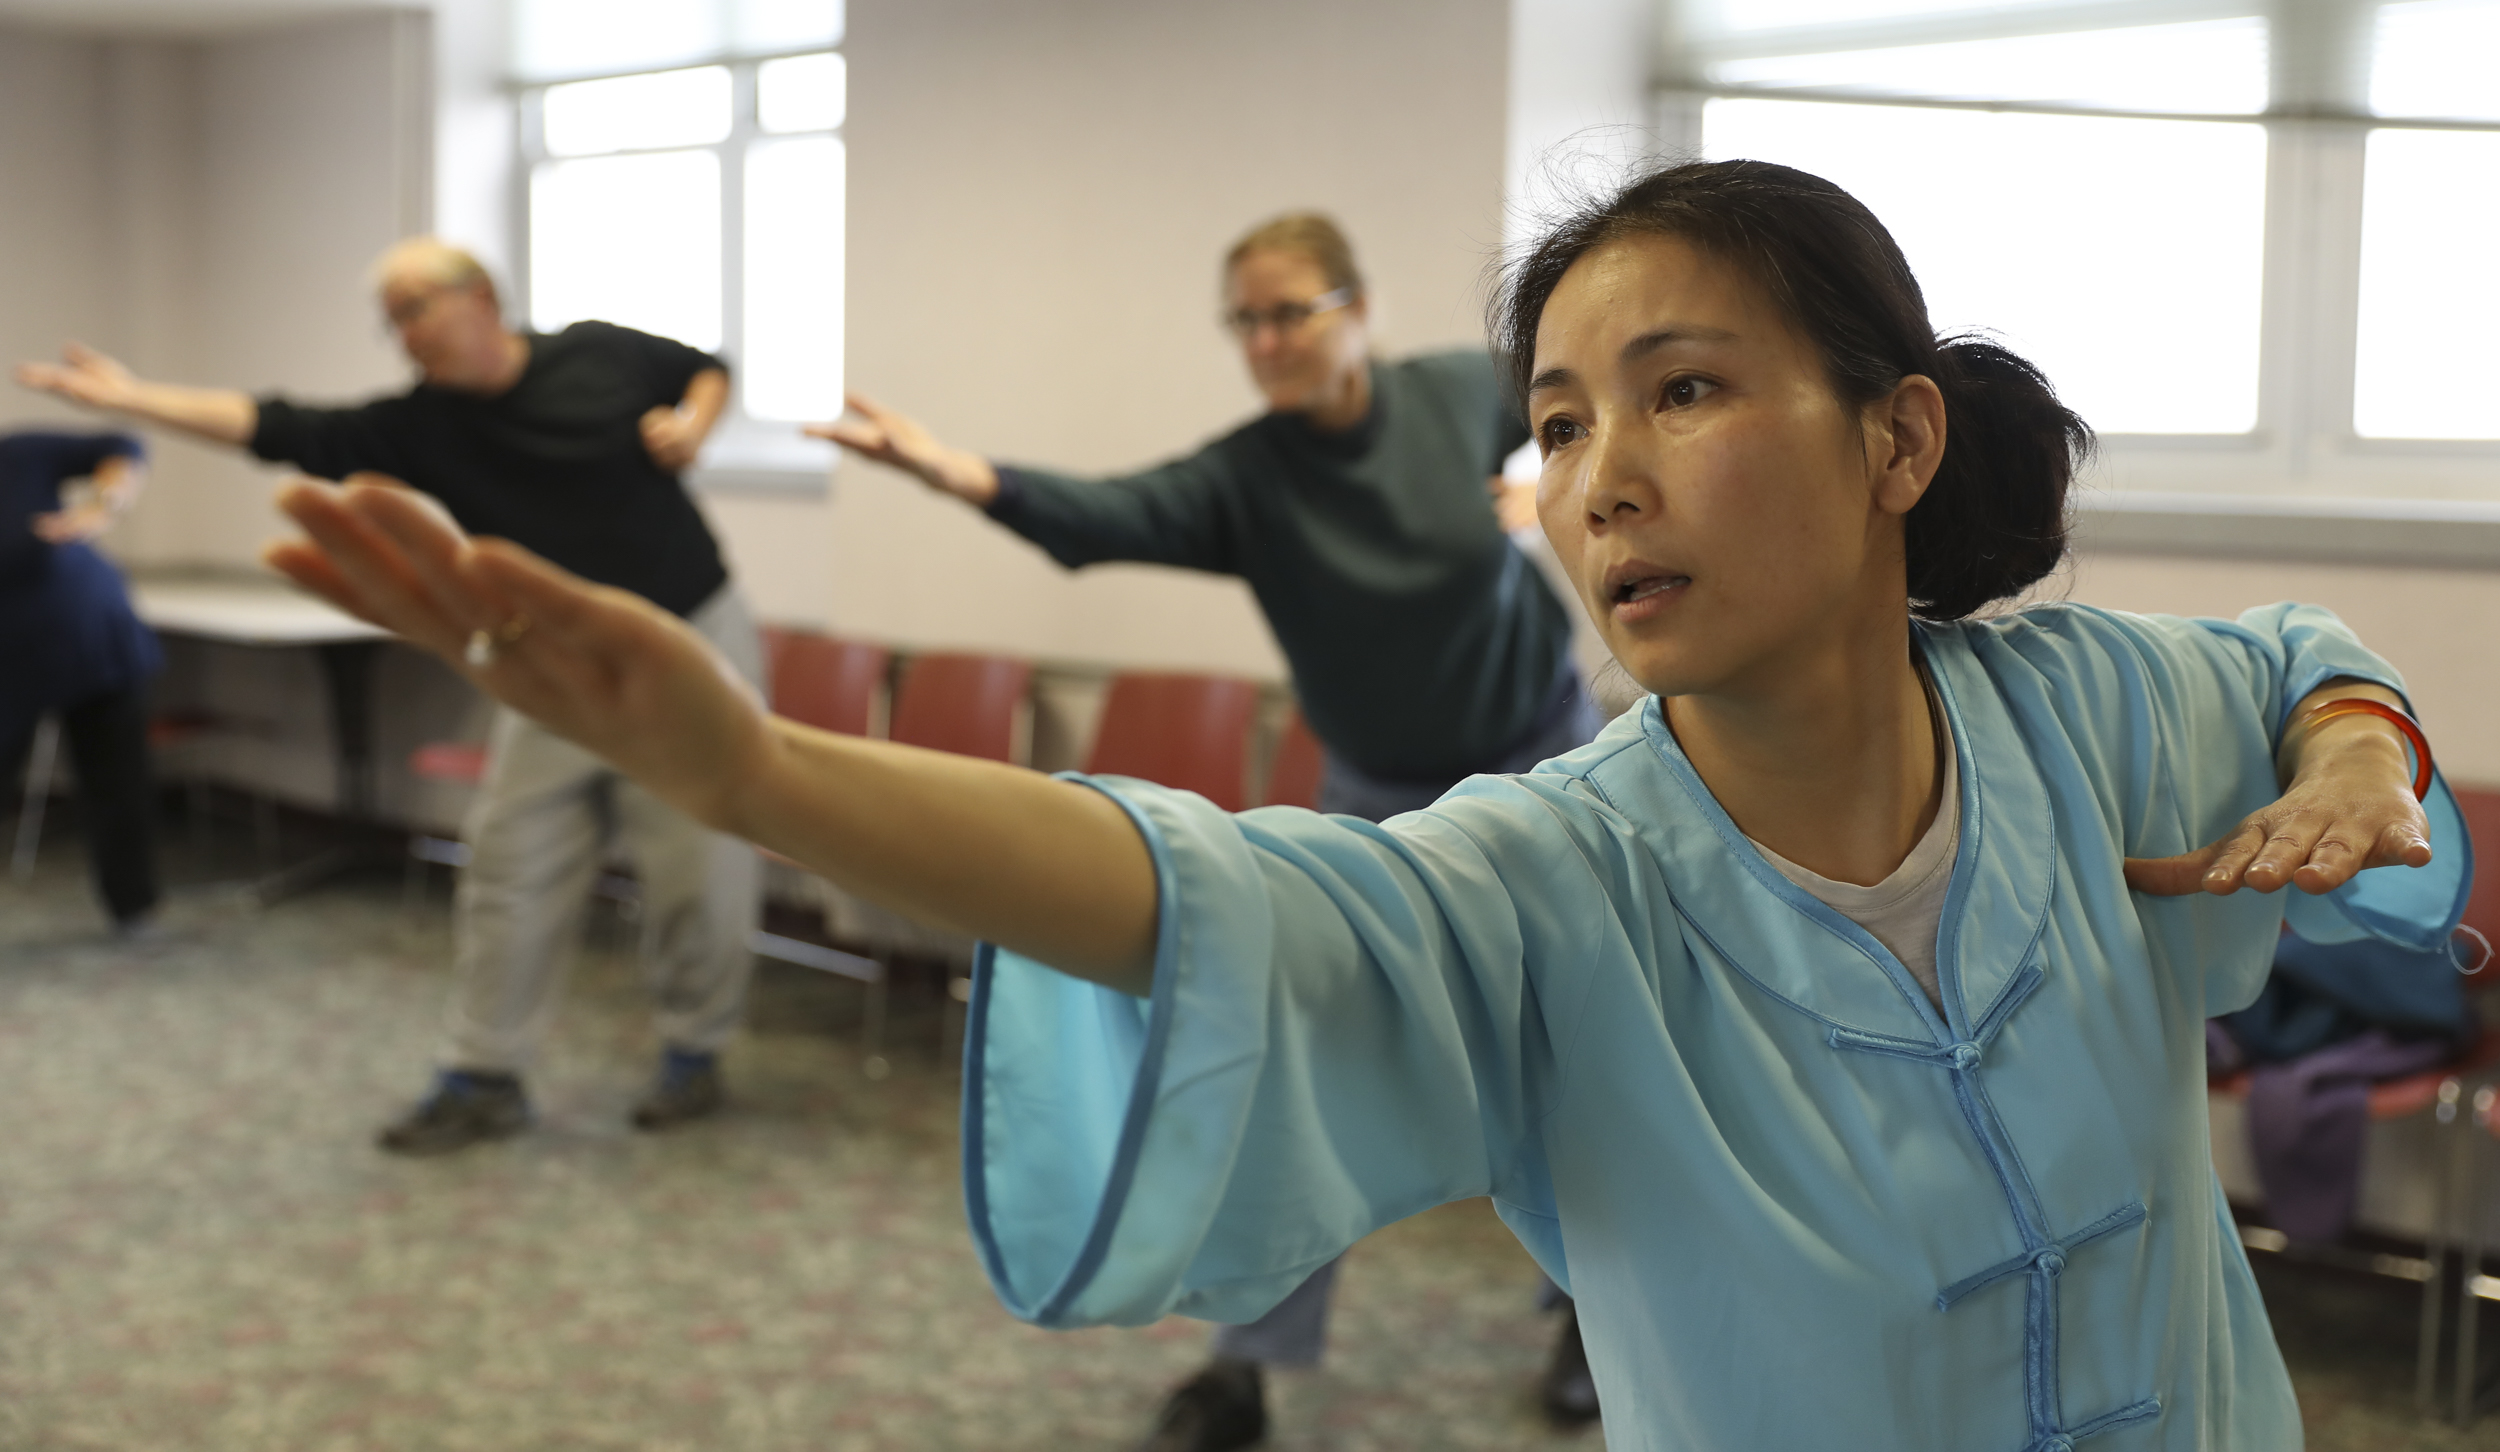  Wenfang Yang, an MU visiting scholar from Shanghai Normal University, stretches out her right arm in the Health Qi Gong class on Tuesday, March 7, 2018 at Mizzou North. MU Confucius Institute began offering this class in early January this year. 